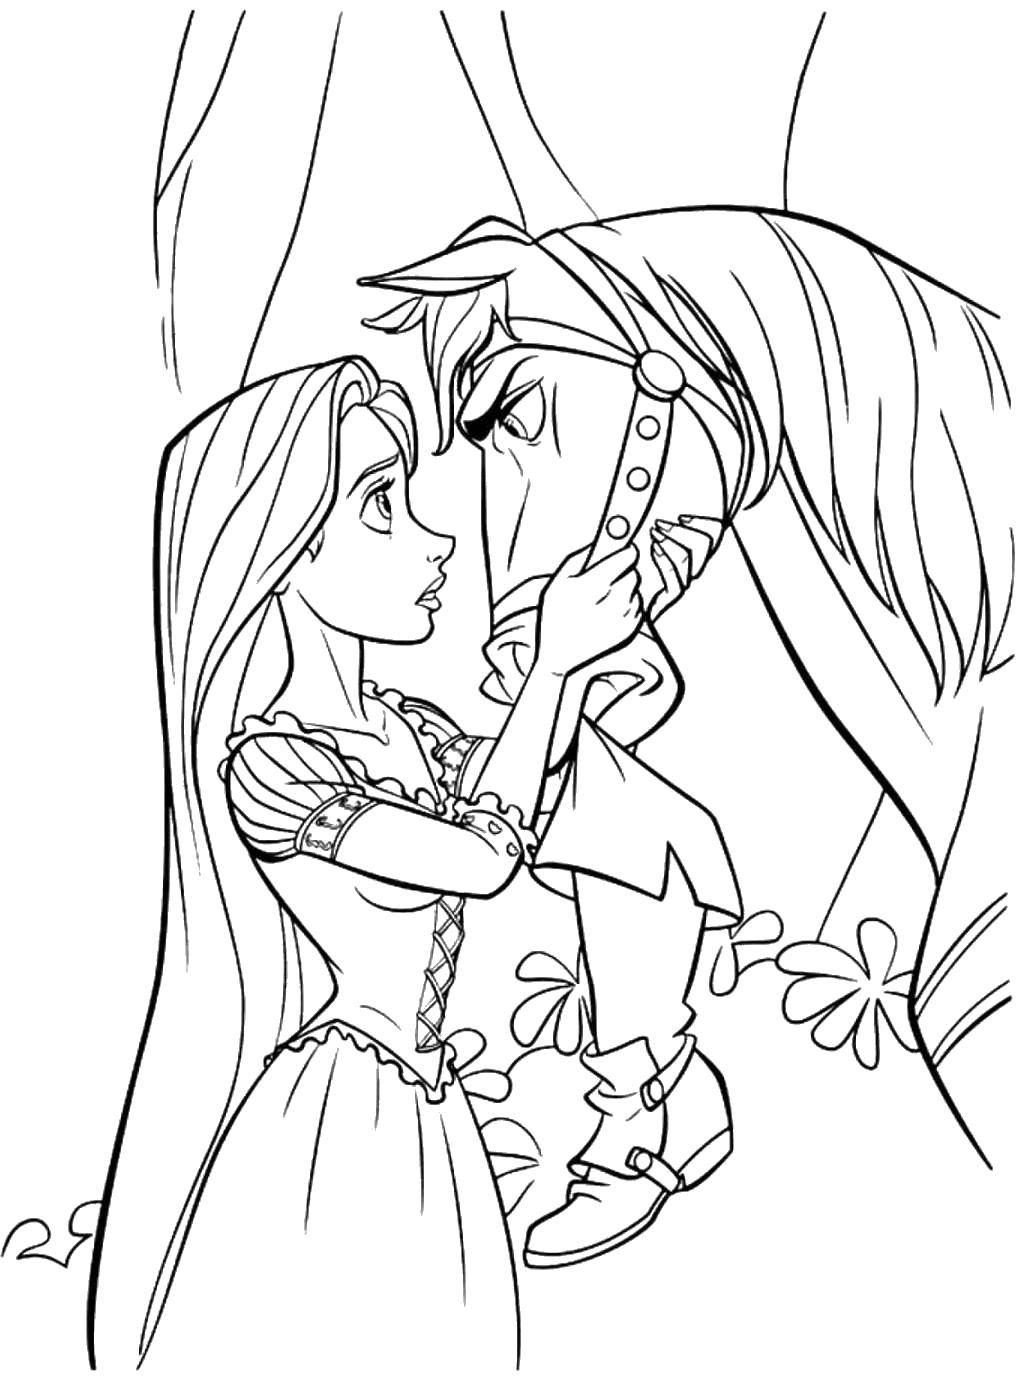 Coloring Long-haired Rapunzel. Category coloring pages Rapunzel tangled. Tags:  Disney, Rapunzel.